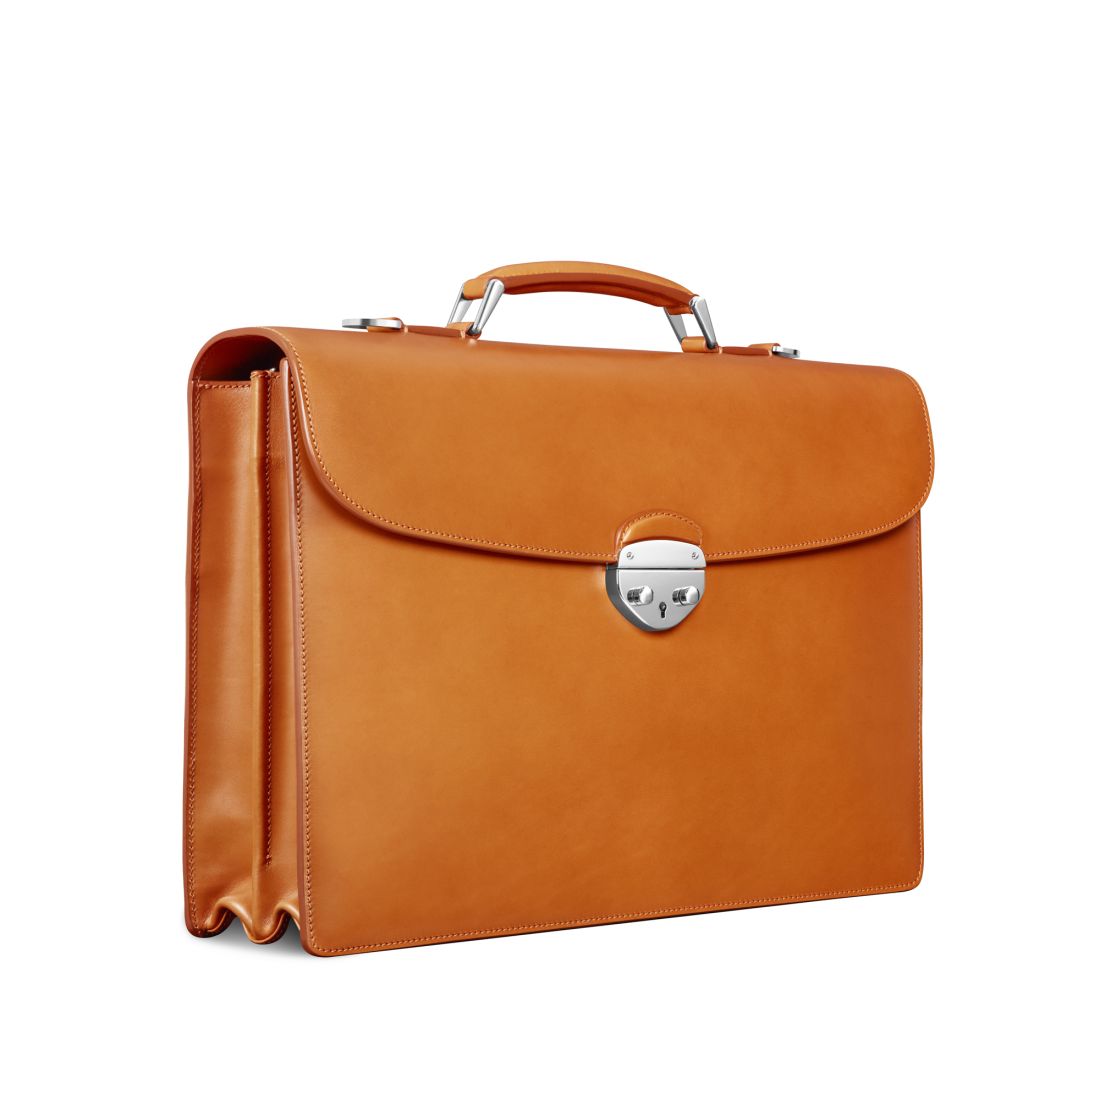 Hanover 2 Briefcase in Saddle Leather